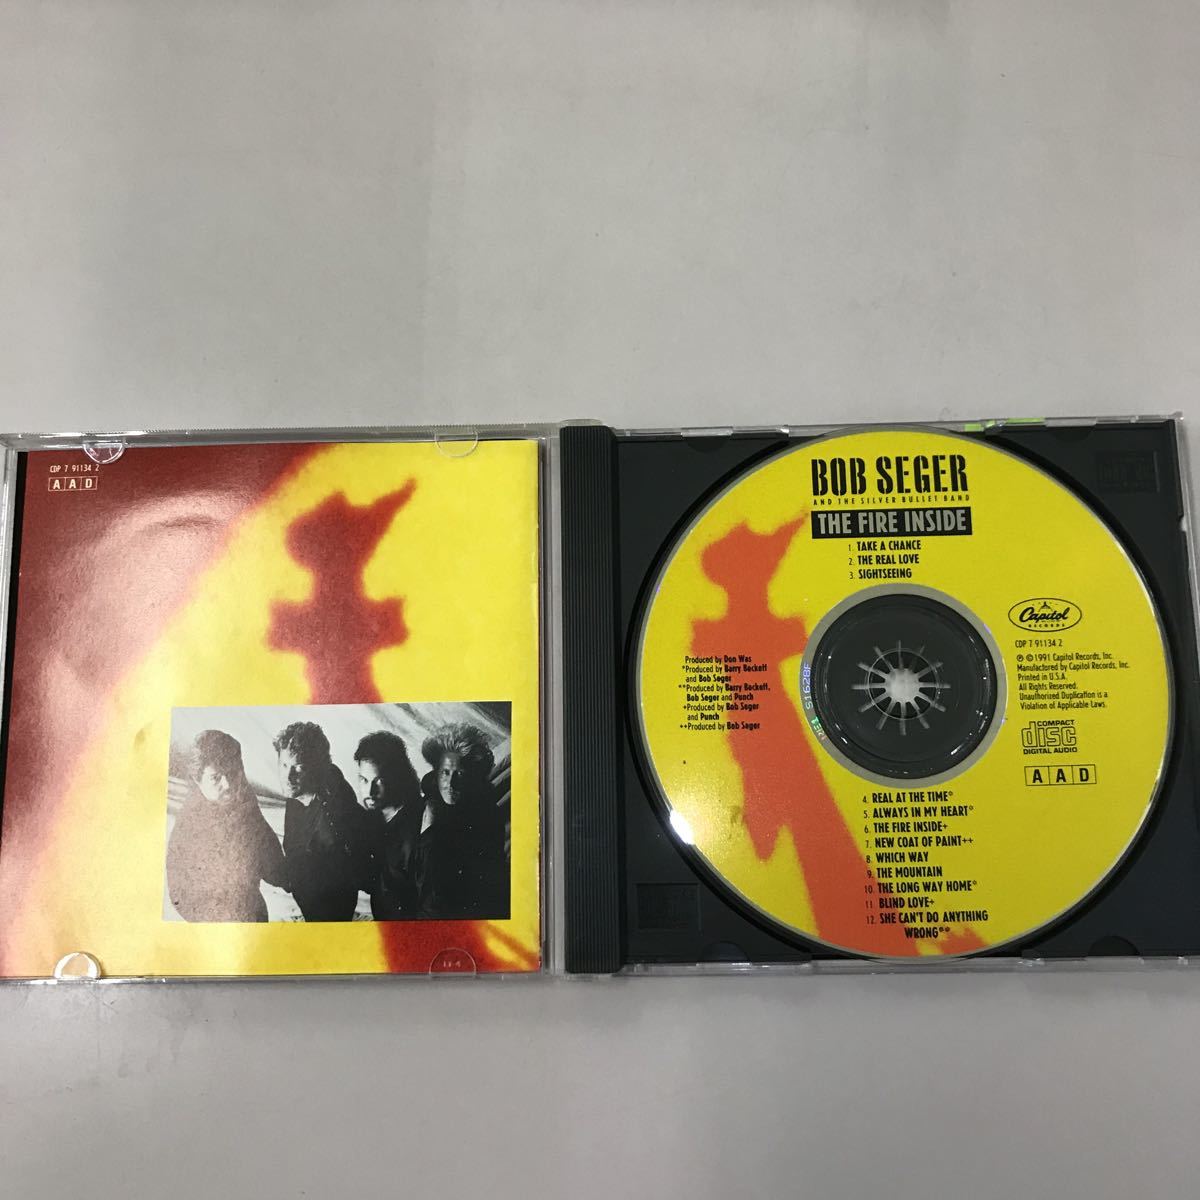 CD 輸入盤 中古【洋楽】長期保存品 BOB SEGER AND THE SILVER BULLET BAND